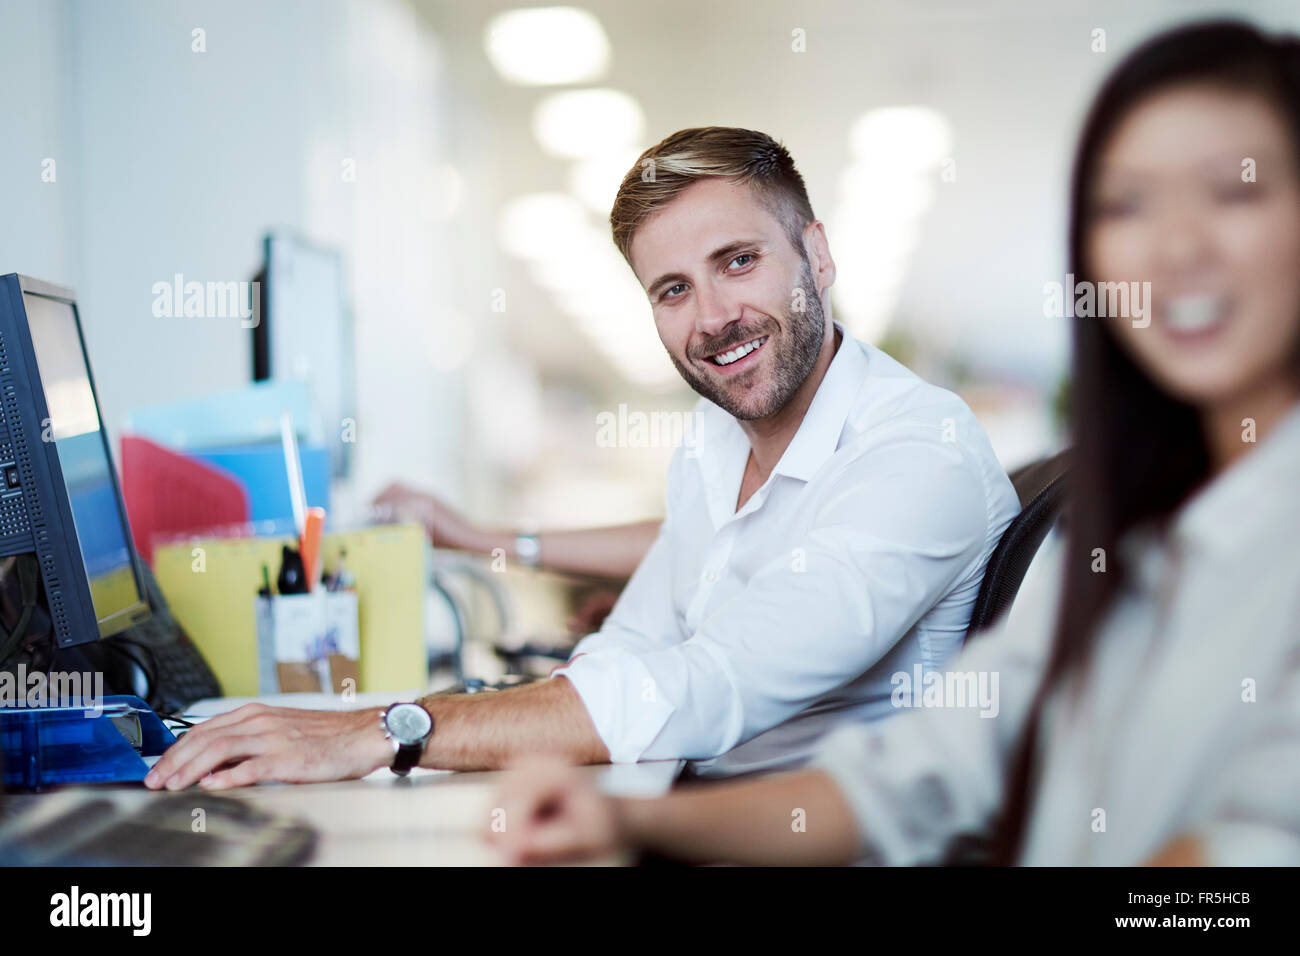 Smiling businessman at computer in office Banque D'Images